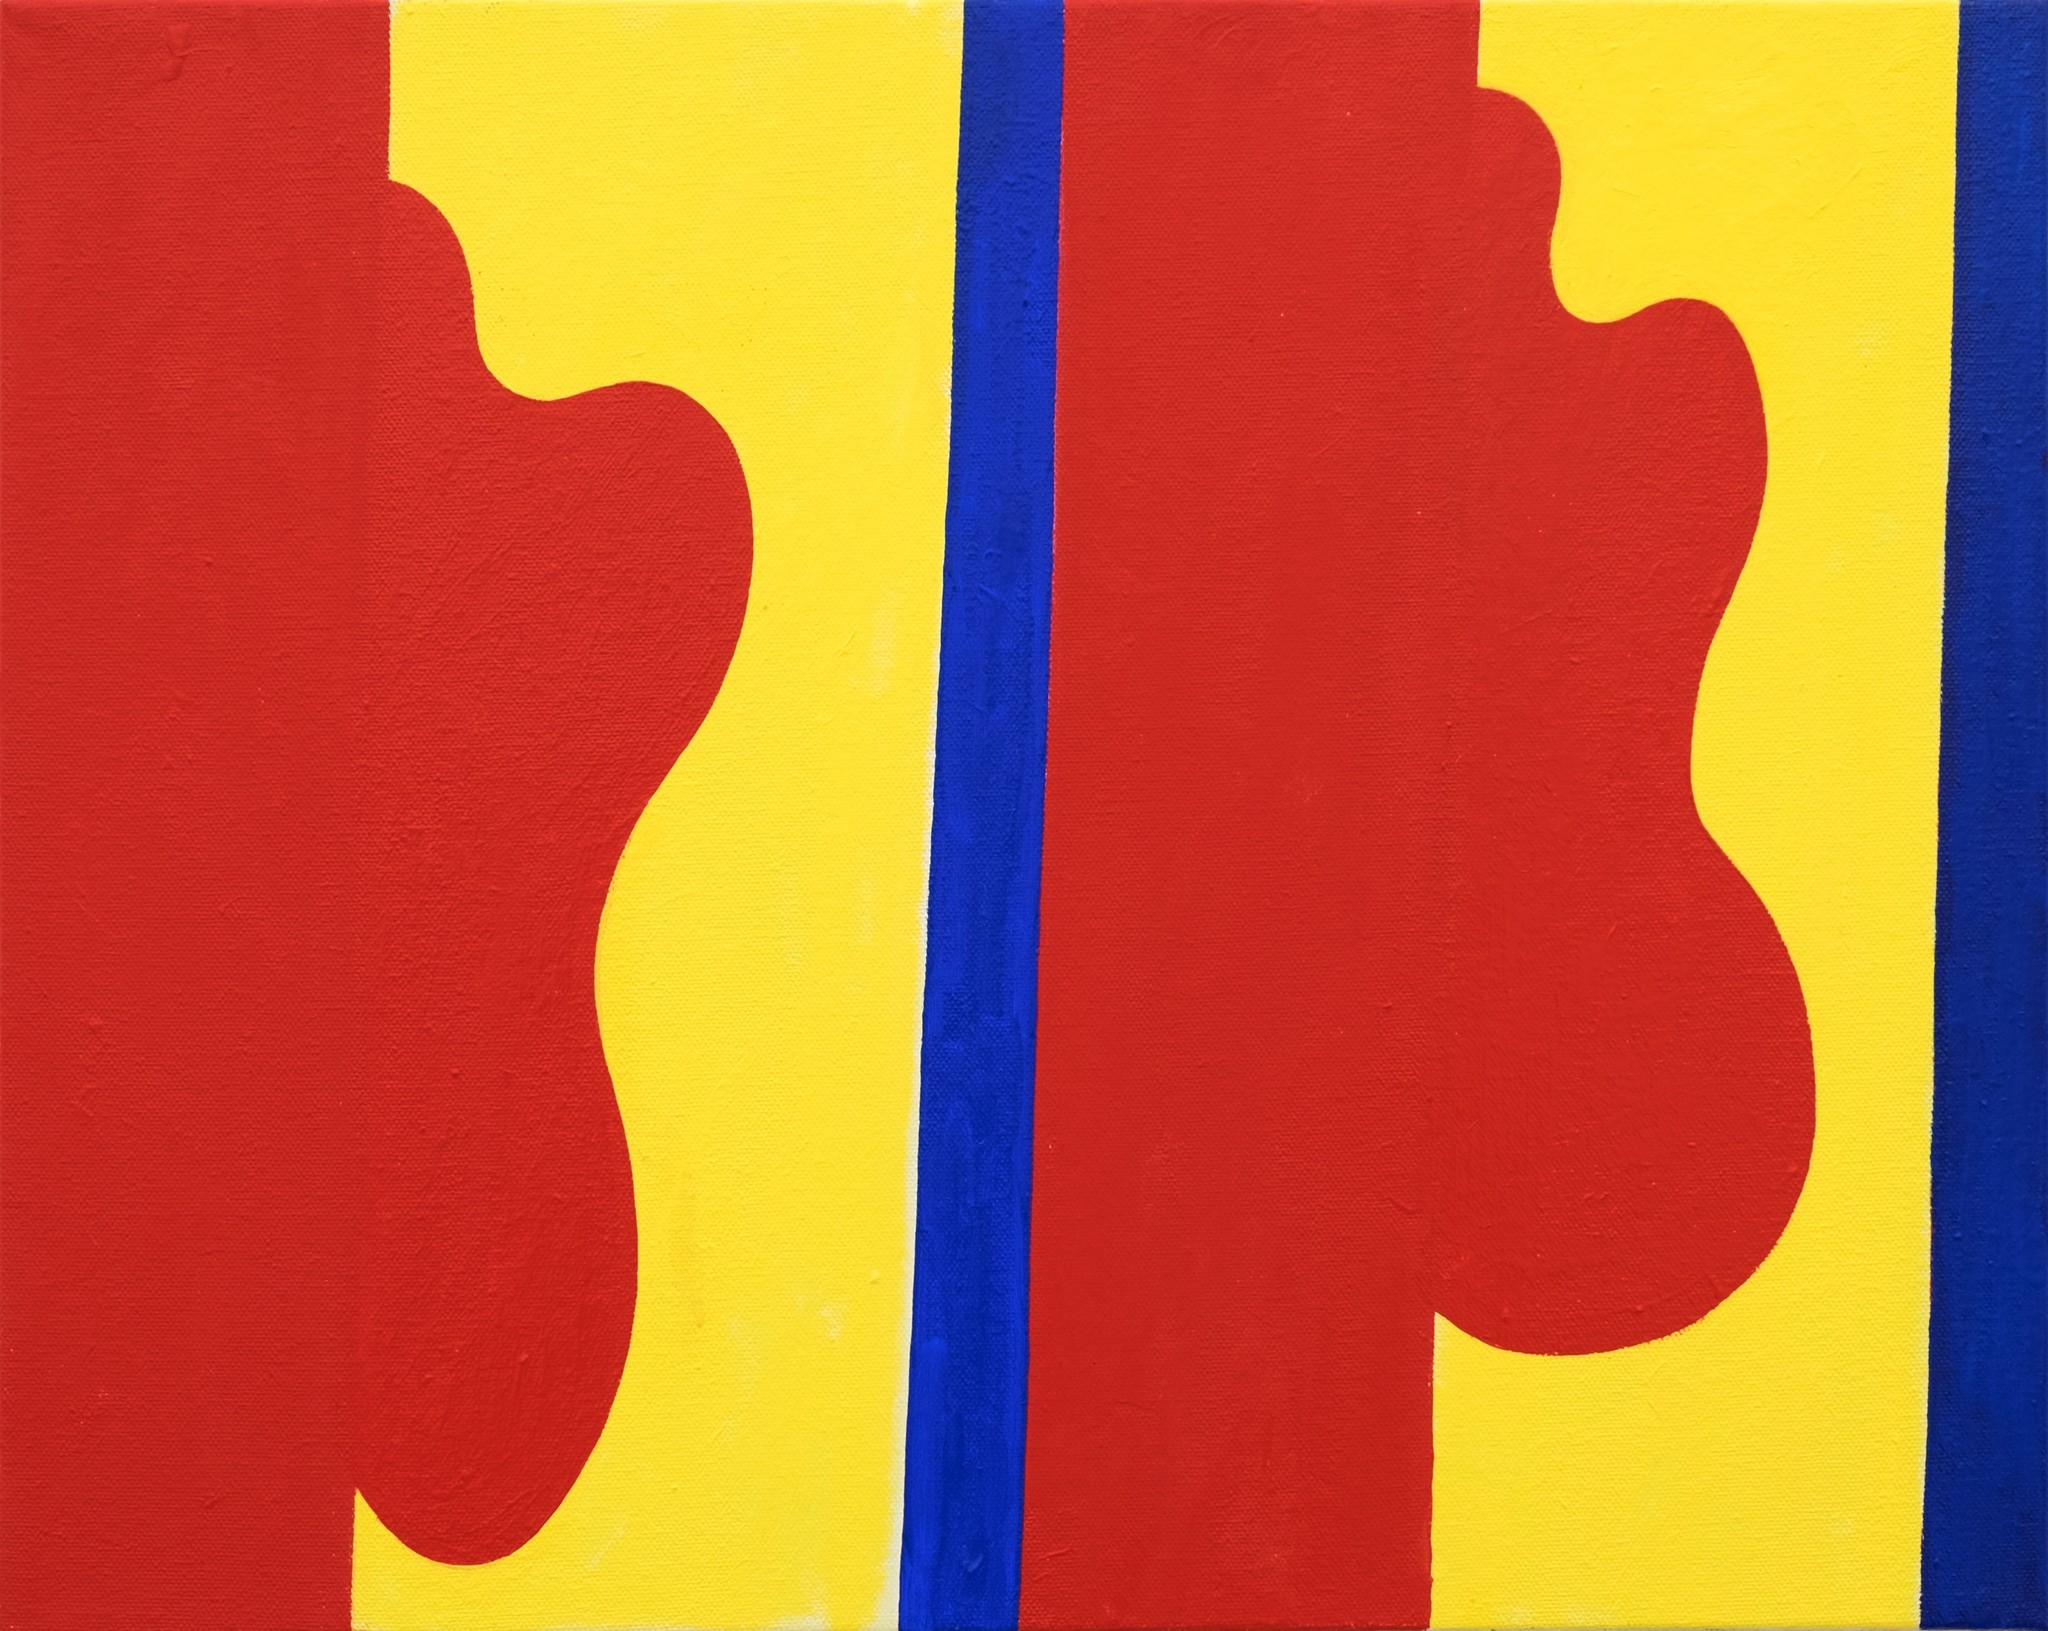 Andrew Masullo's “6432,” 2015-16, oil on canvas, 16 inches by 20 inches.